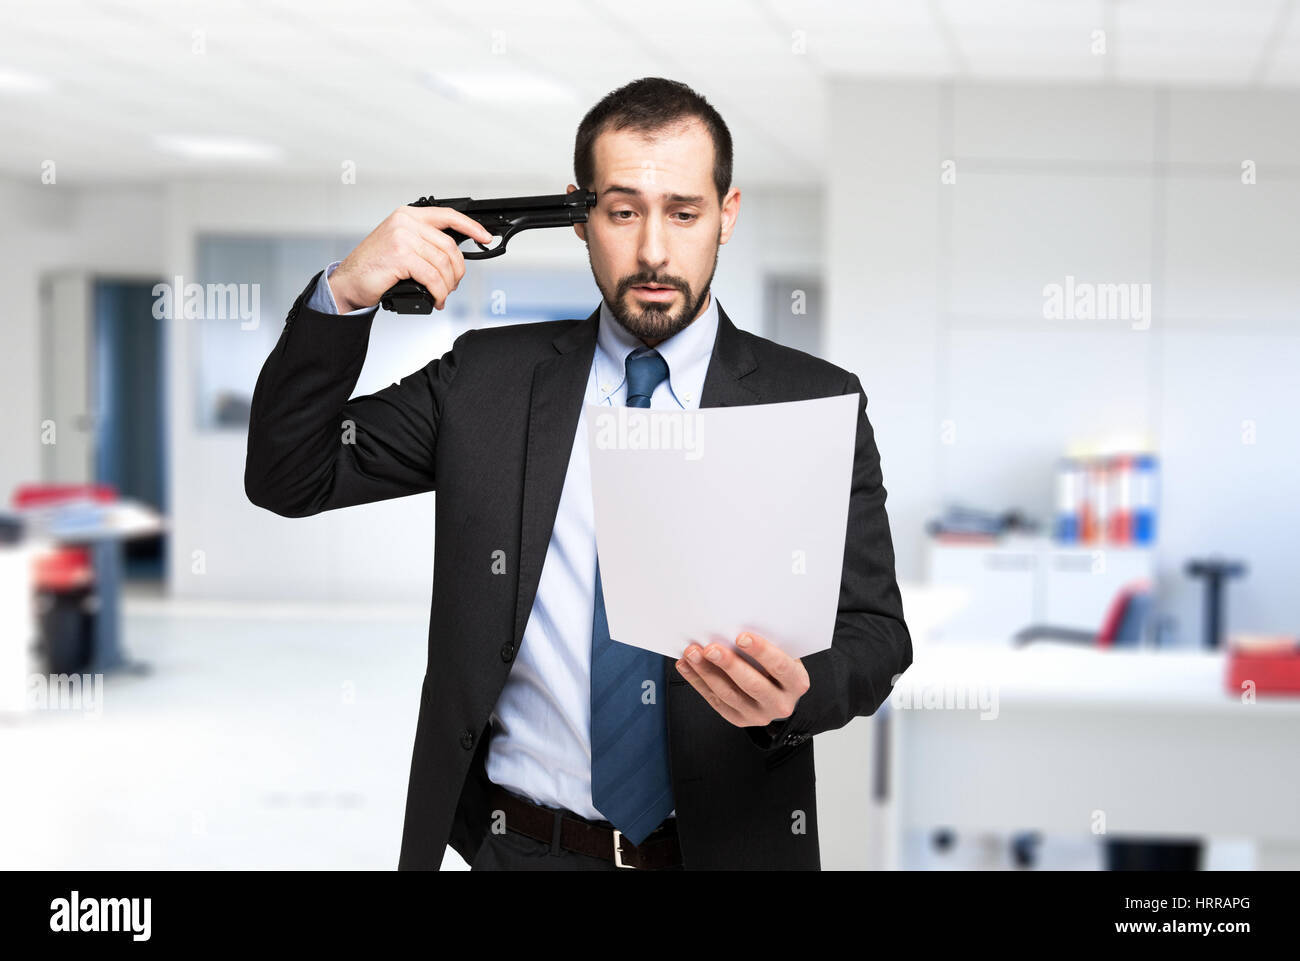 Businessman pointing a gun to his head while reading a document Stock Photo